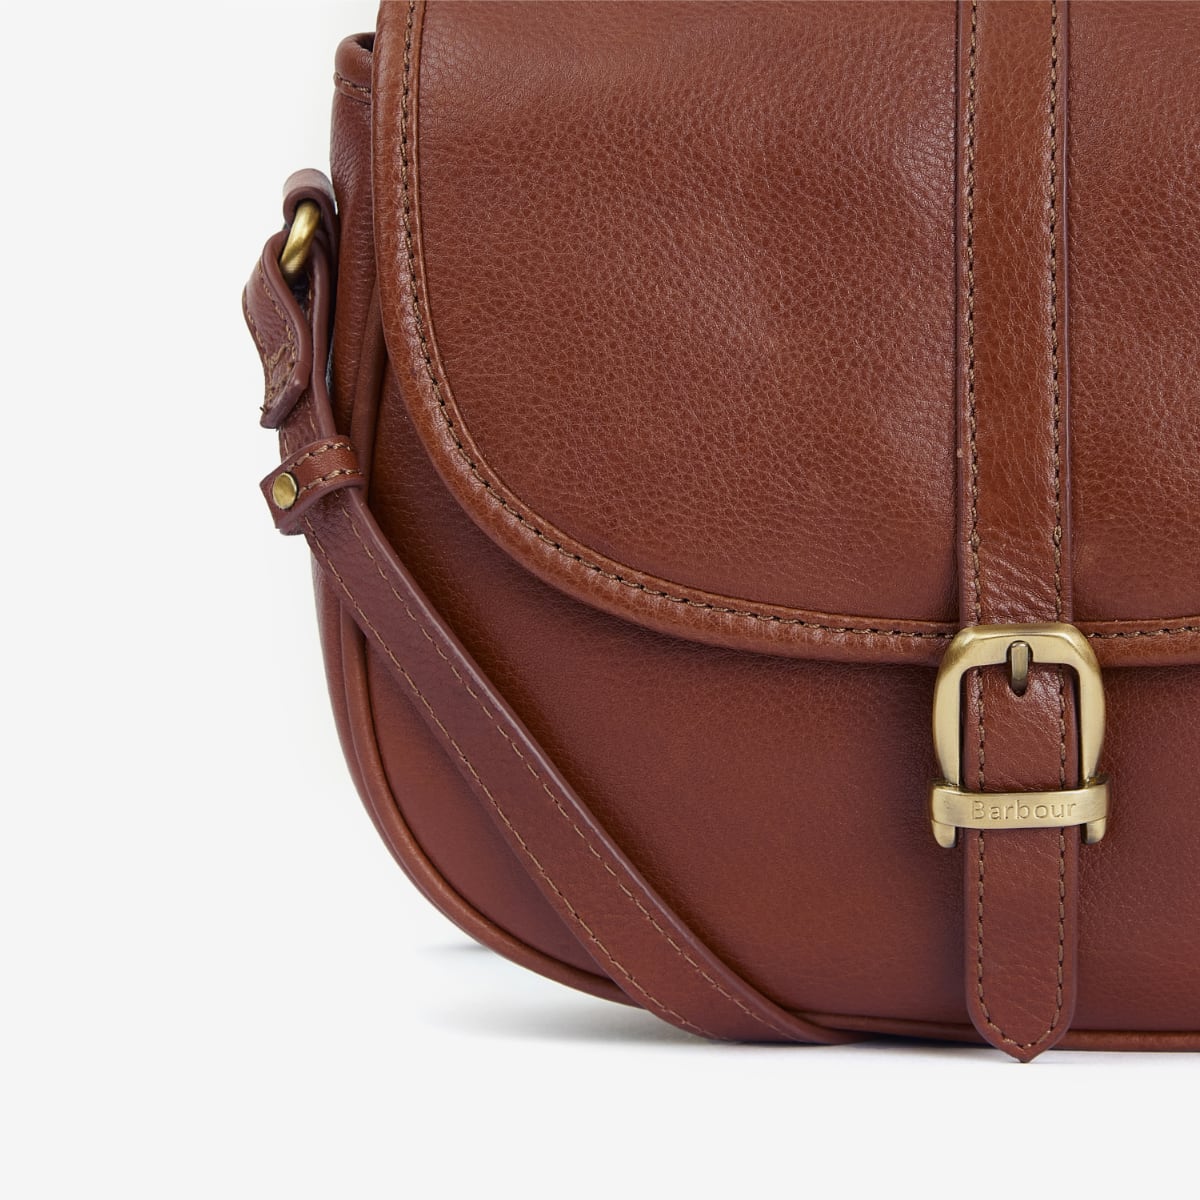 Barbour Laire Leather Medium Saddle Bag | Brown